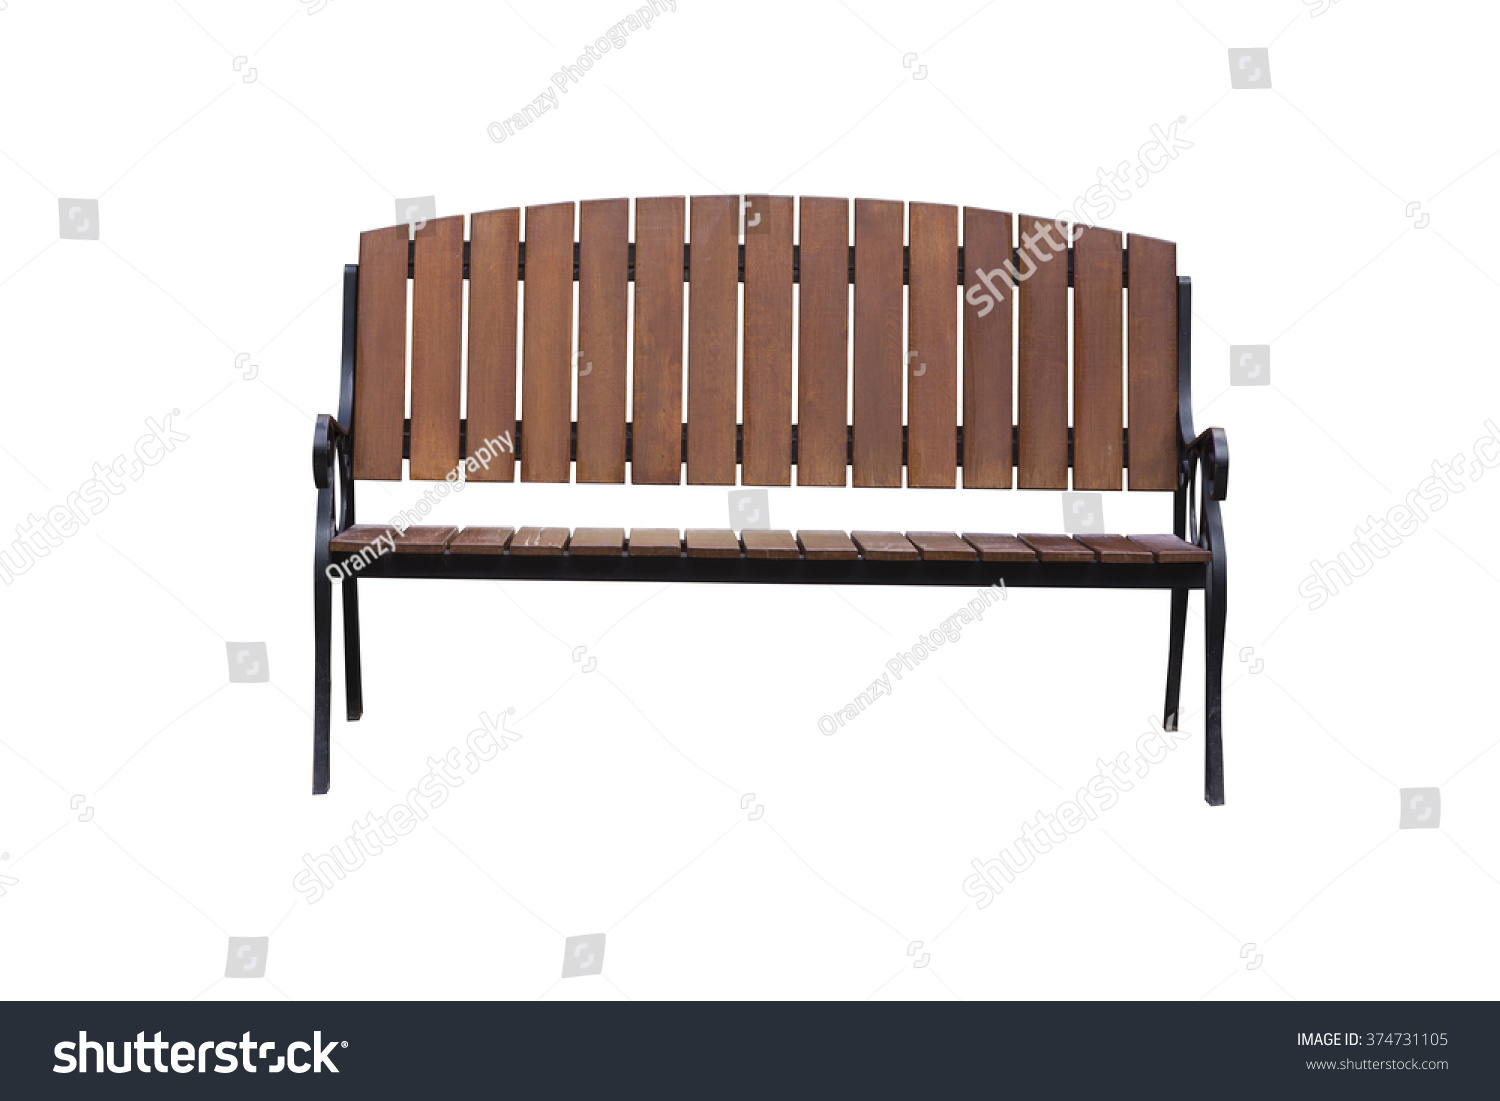 Wooden Park Bench Isolated on White Background #374731105